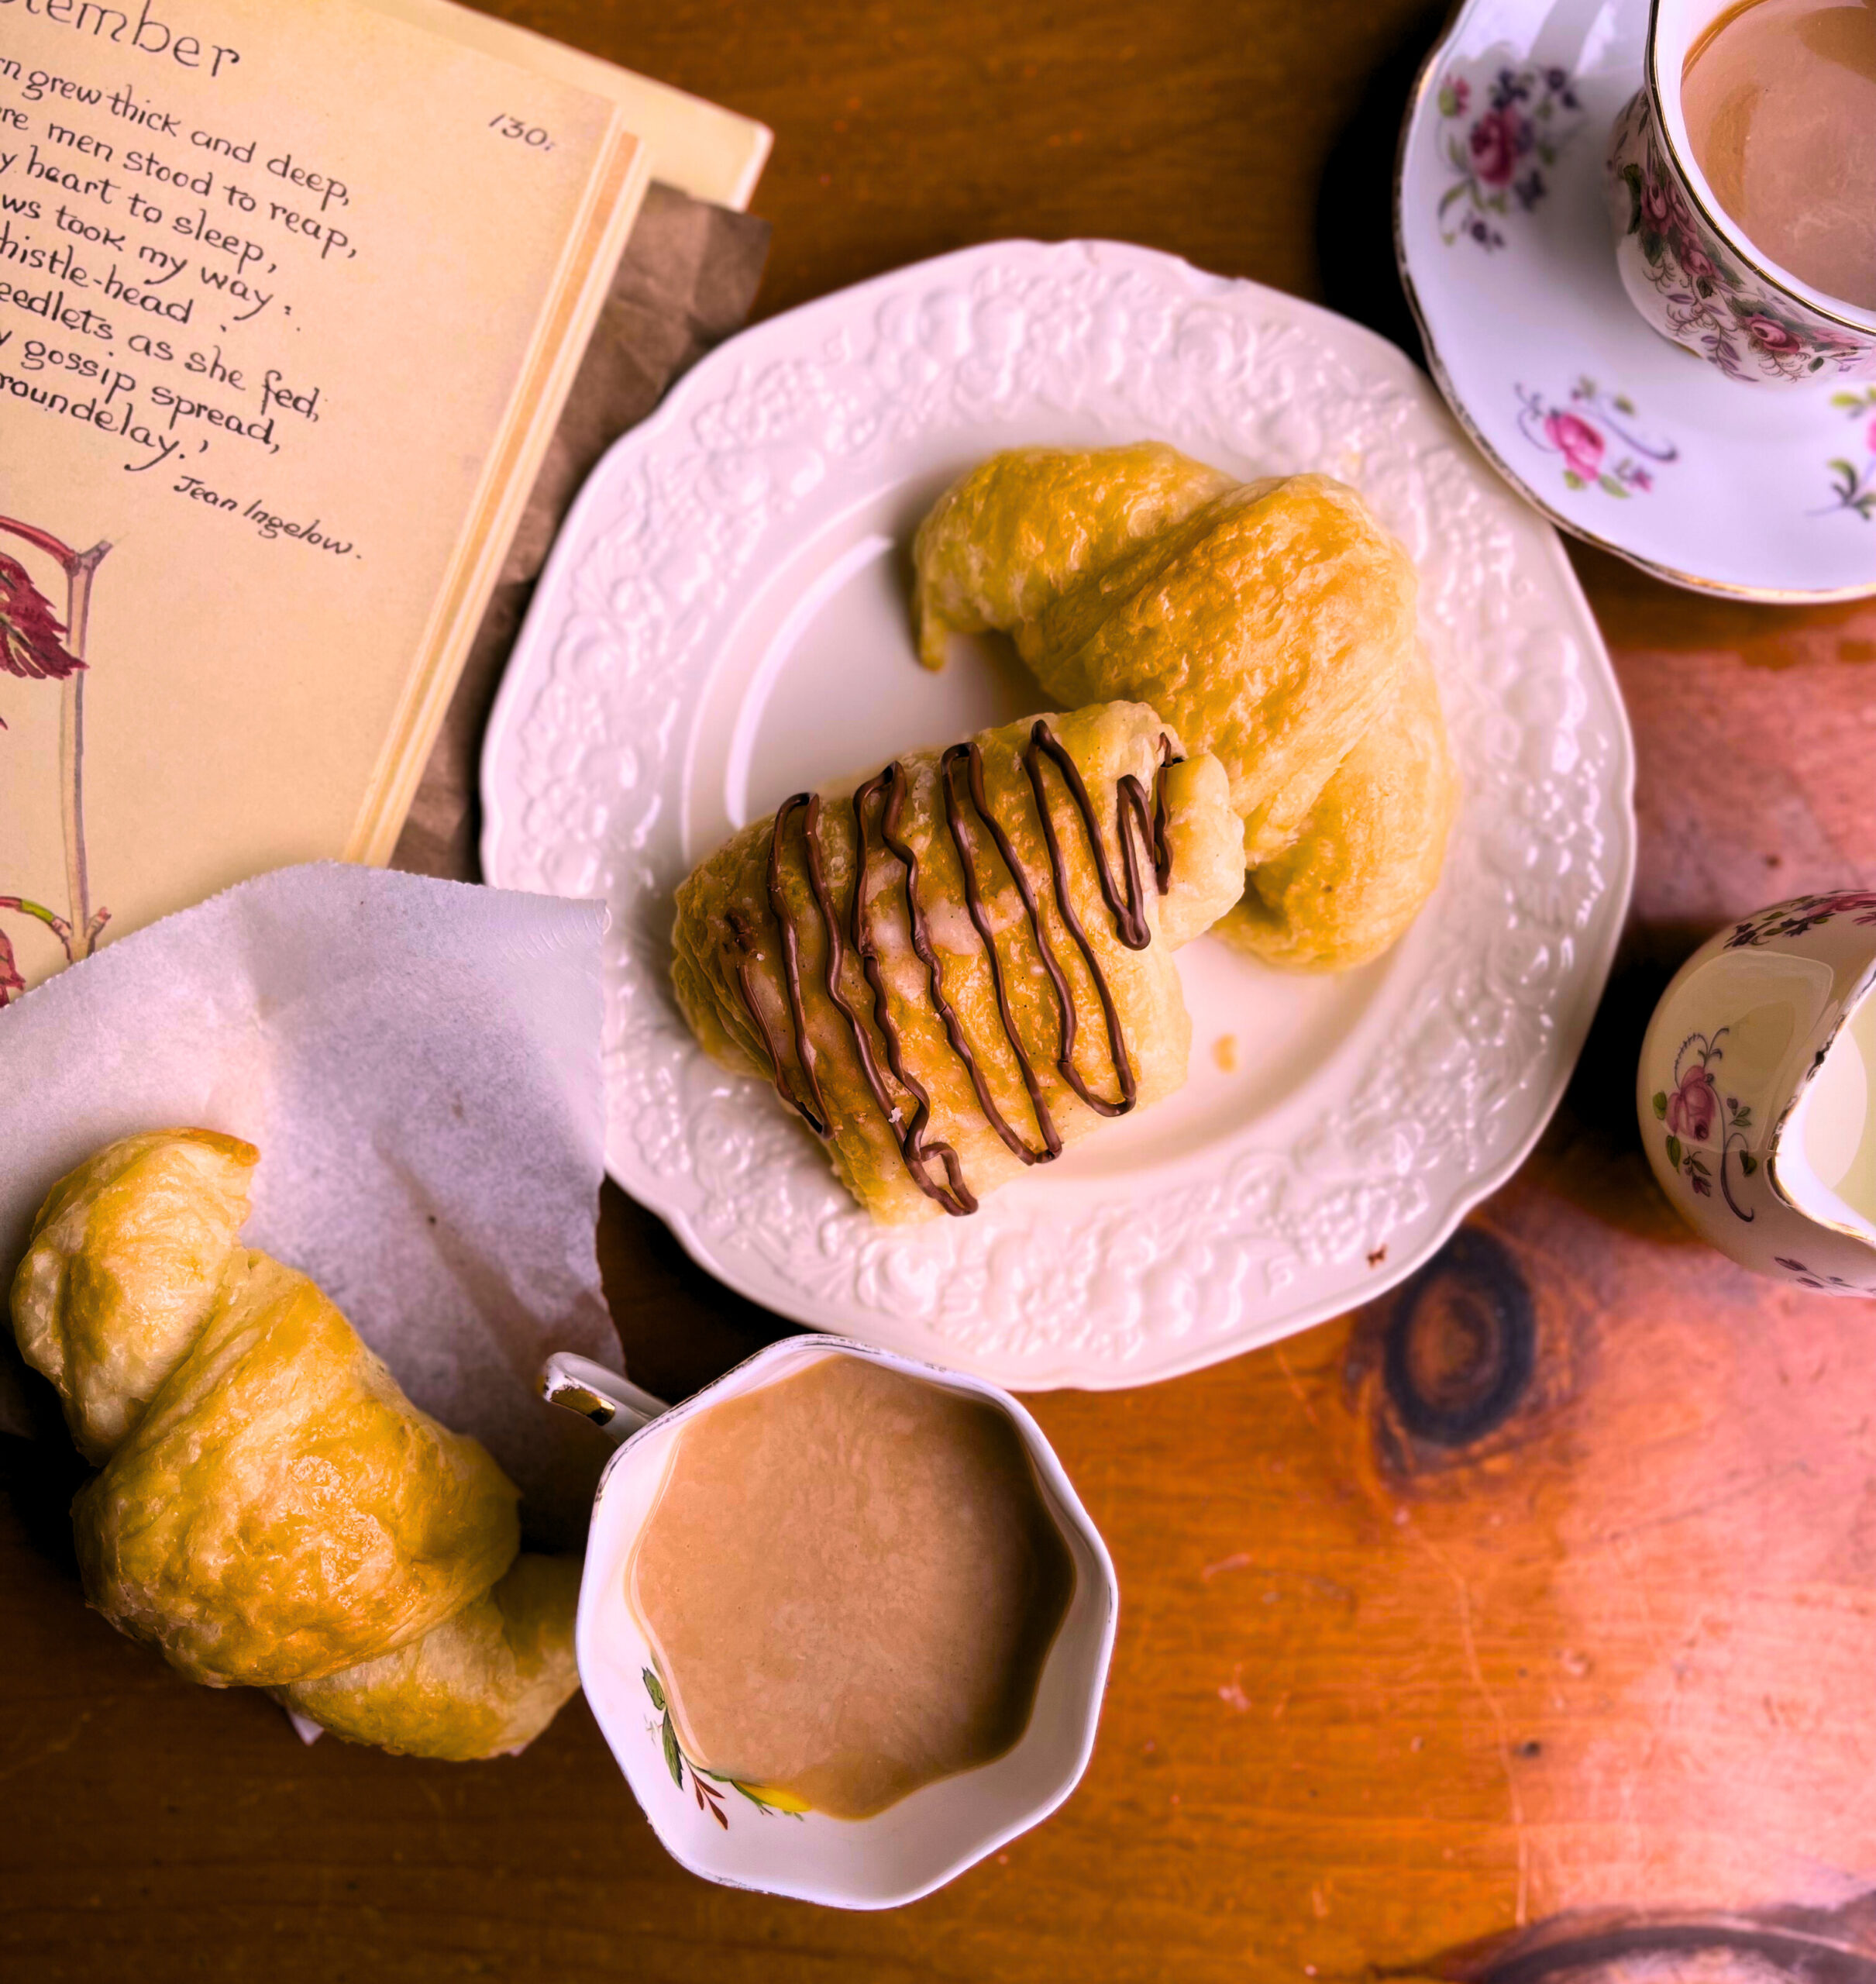 Two croissants and one pain au chocolat. Two on a white plate. Two cups of coffee. An open book off to the side. All on a wooden table